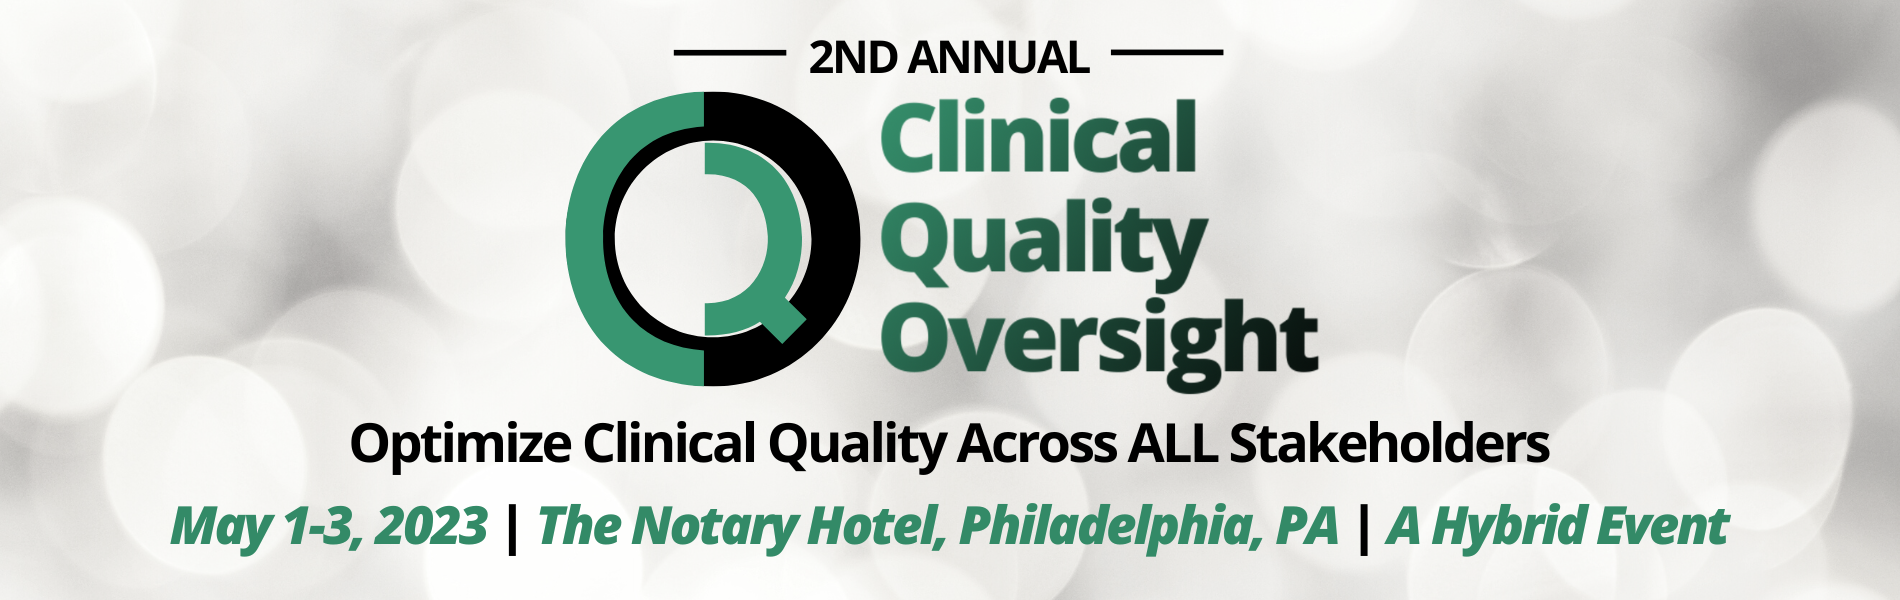 Banner of 2nd Annual Clinical Quality Oversight, Tagline, Optimize Clinical Quality Across All Stakeholders, May 1-3, 2022, The Notary Hotel, Philadelphia, PA. A Hybrid Event